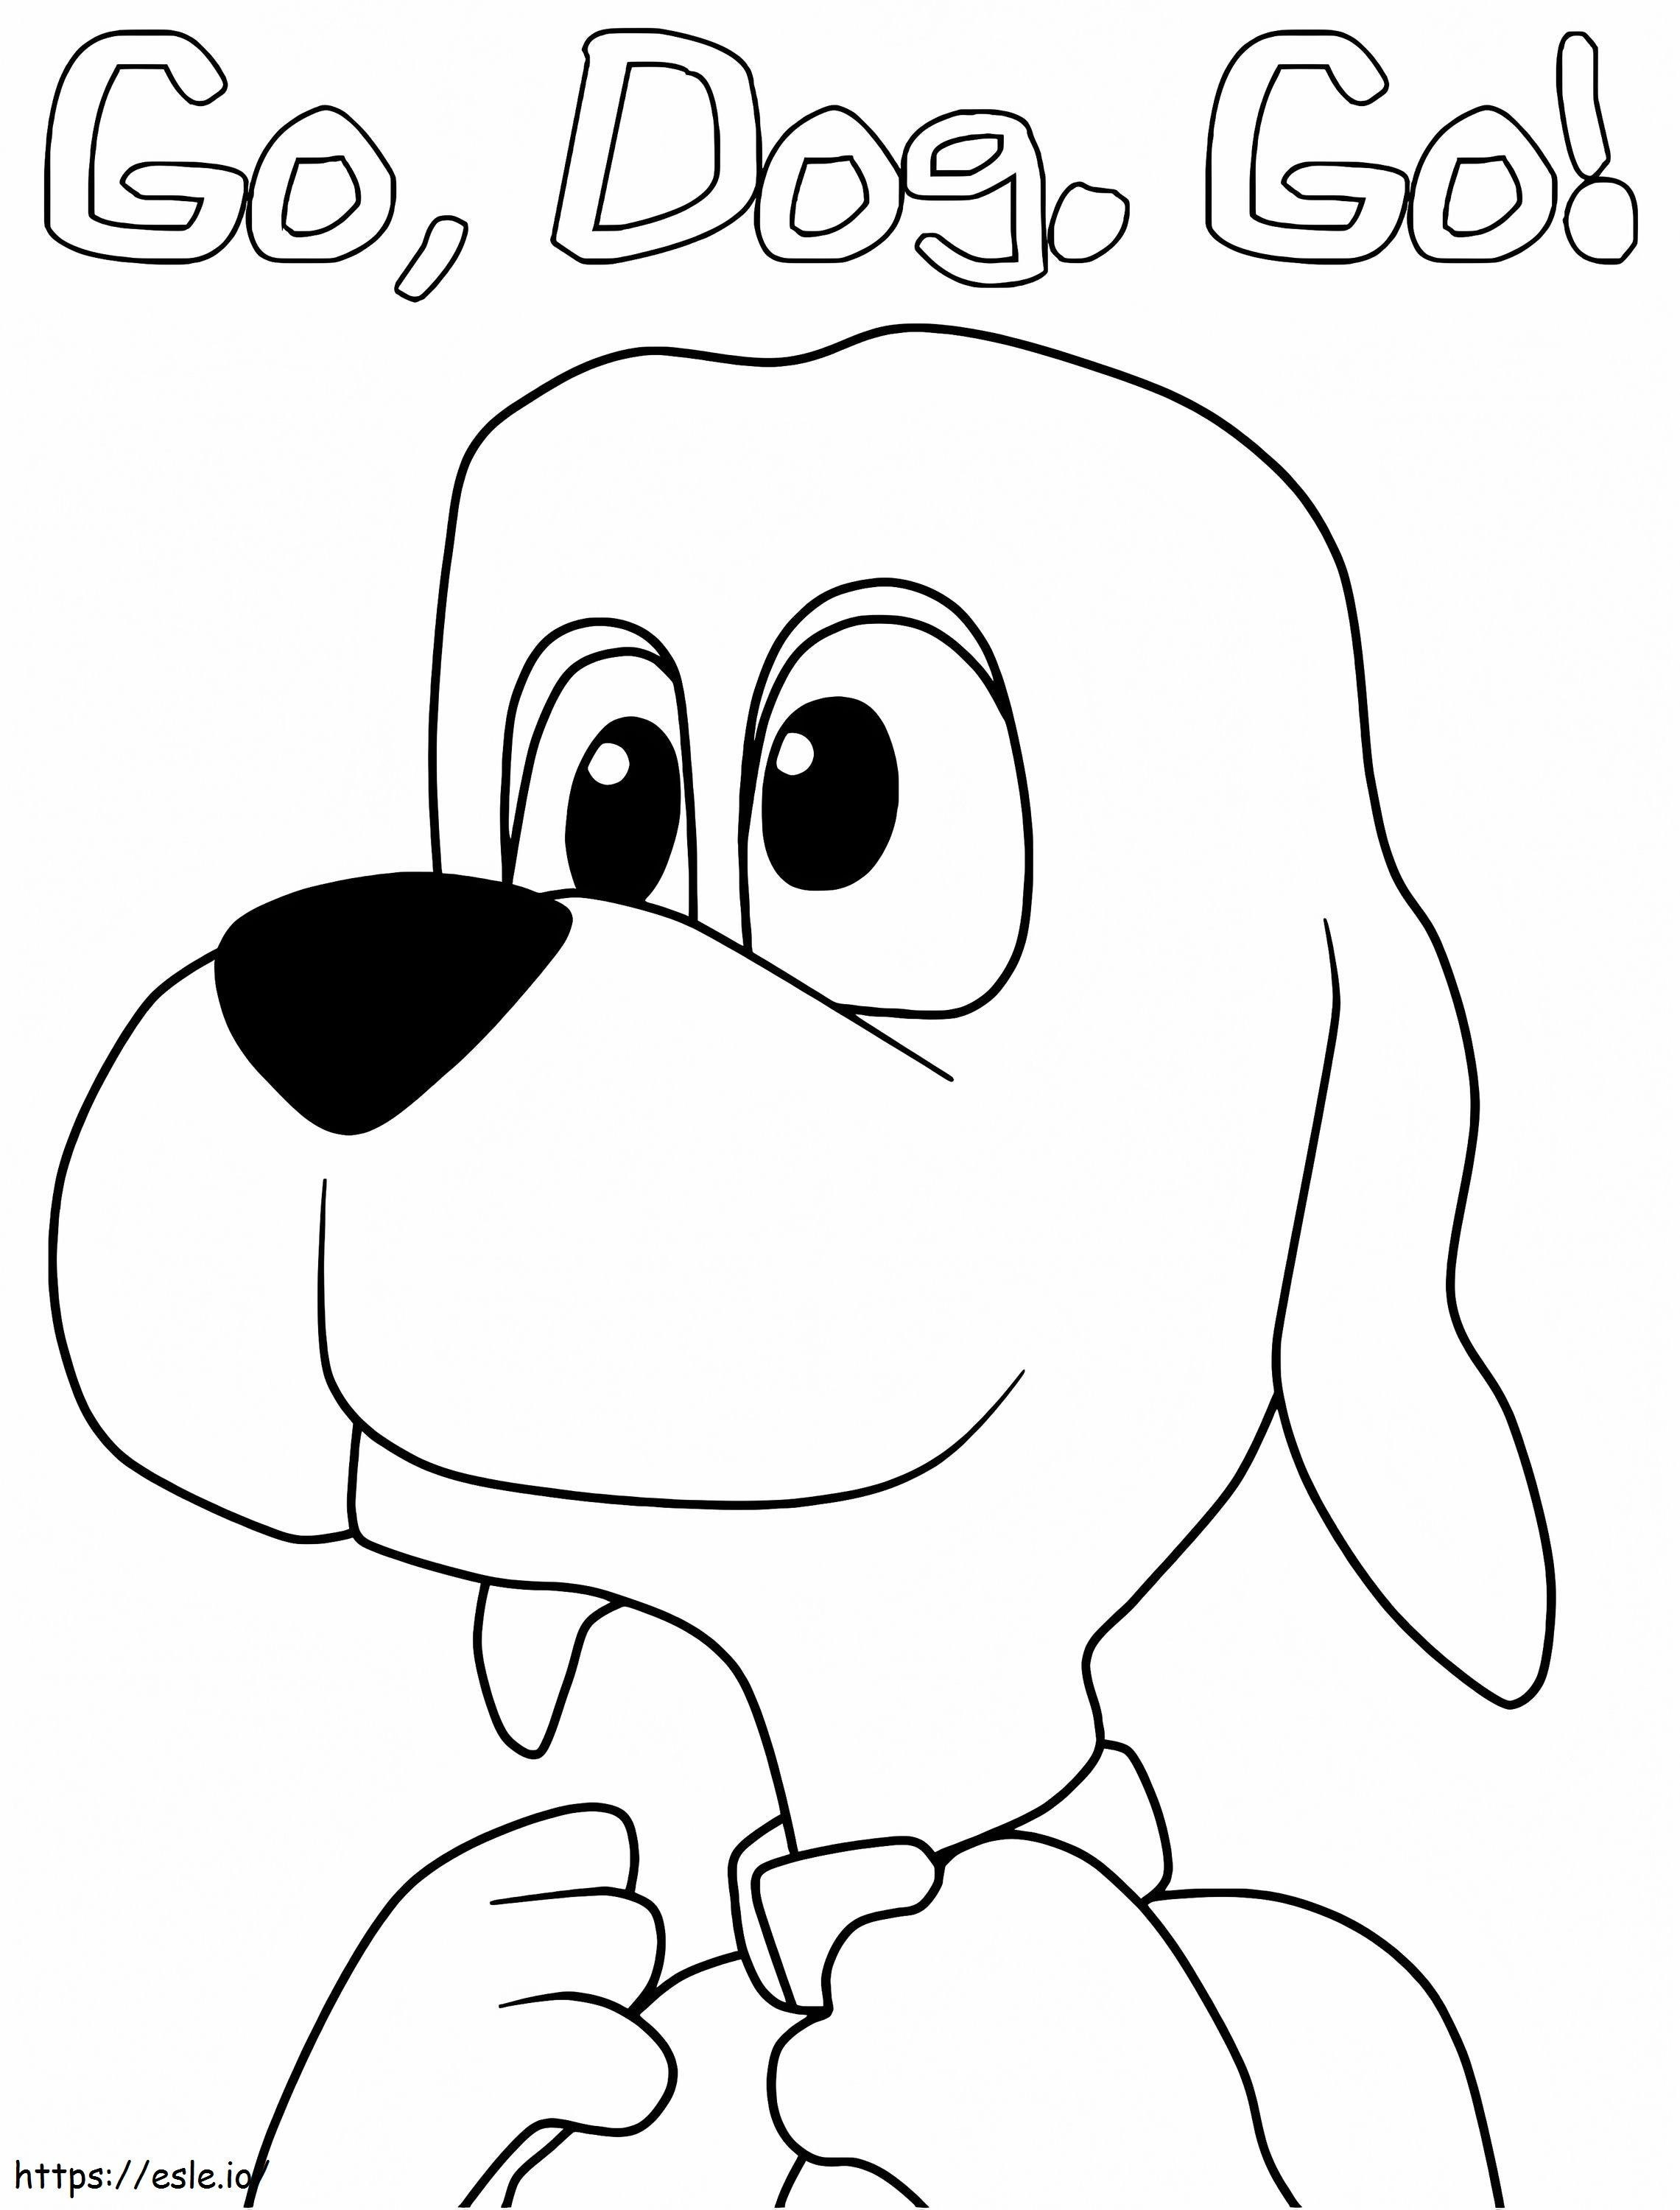 Gilber Barker From Go Dog Go coloring page